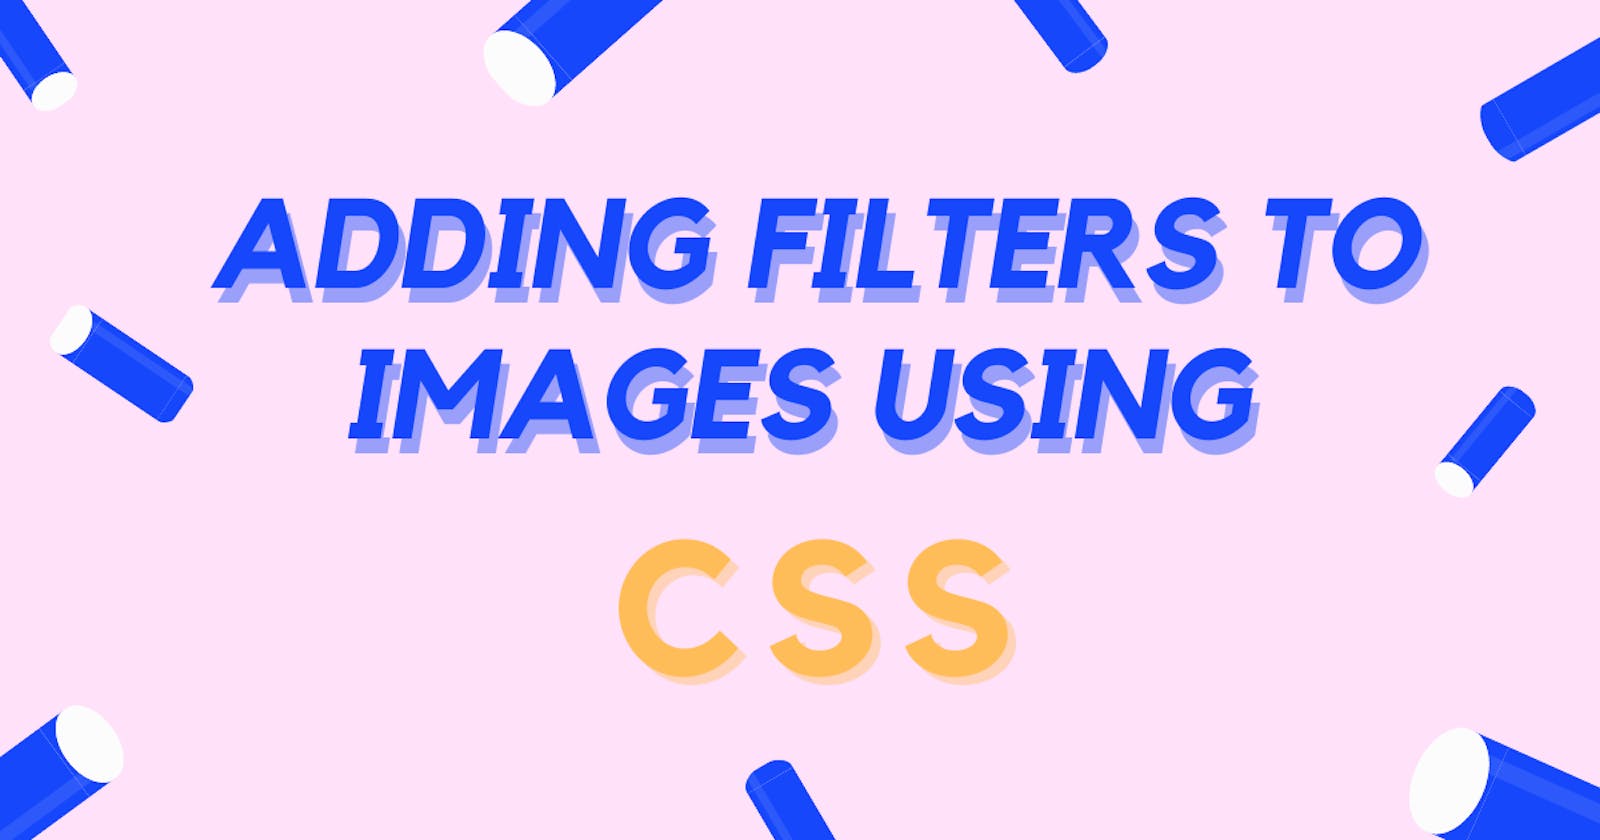 Adding filters to images using CSS